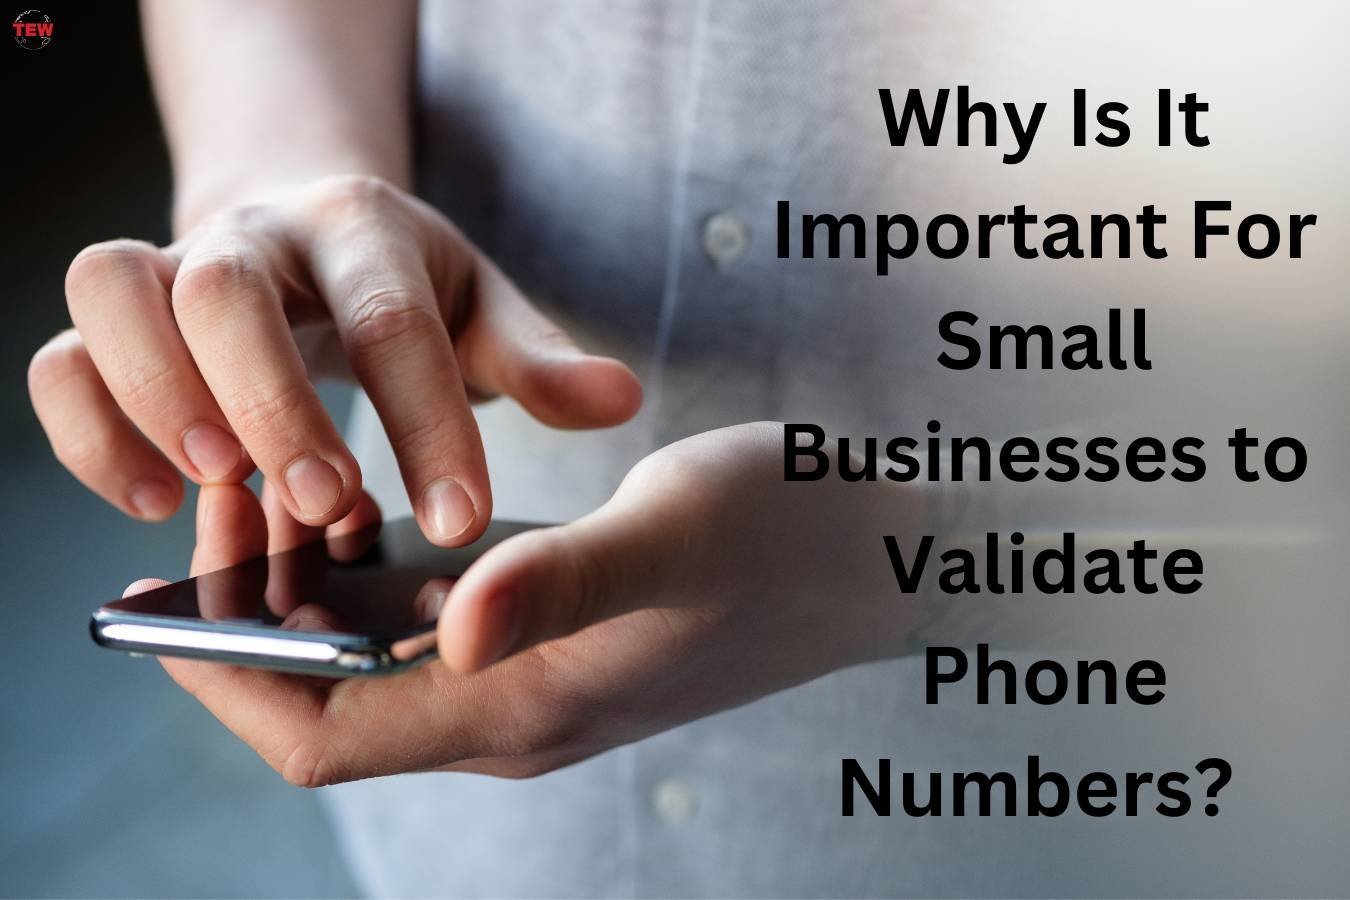 7 Reasons Why validating phone numbers Is Important For Small Businesses? | The Enterprise world